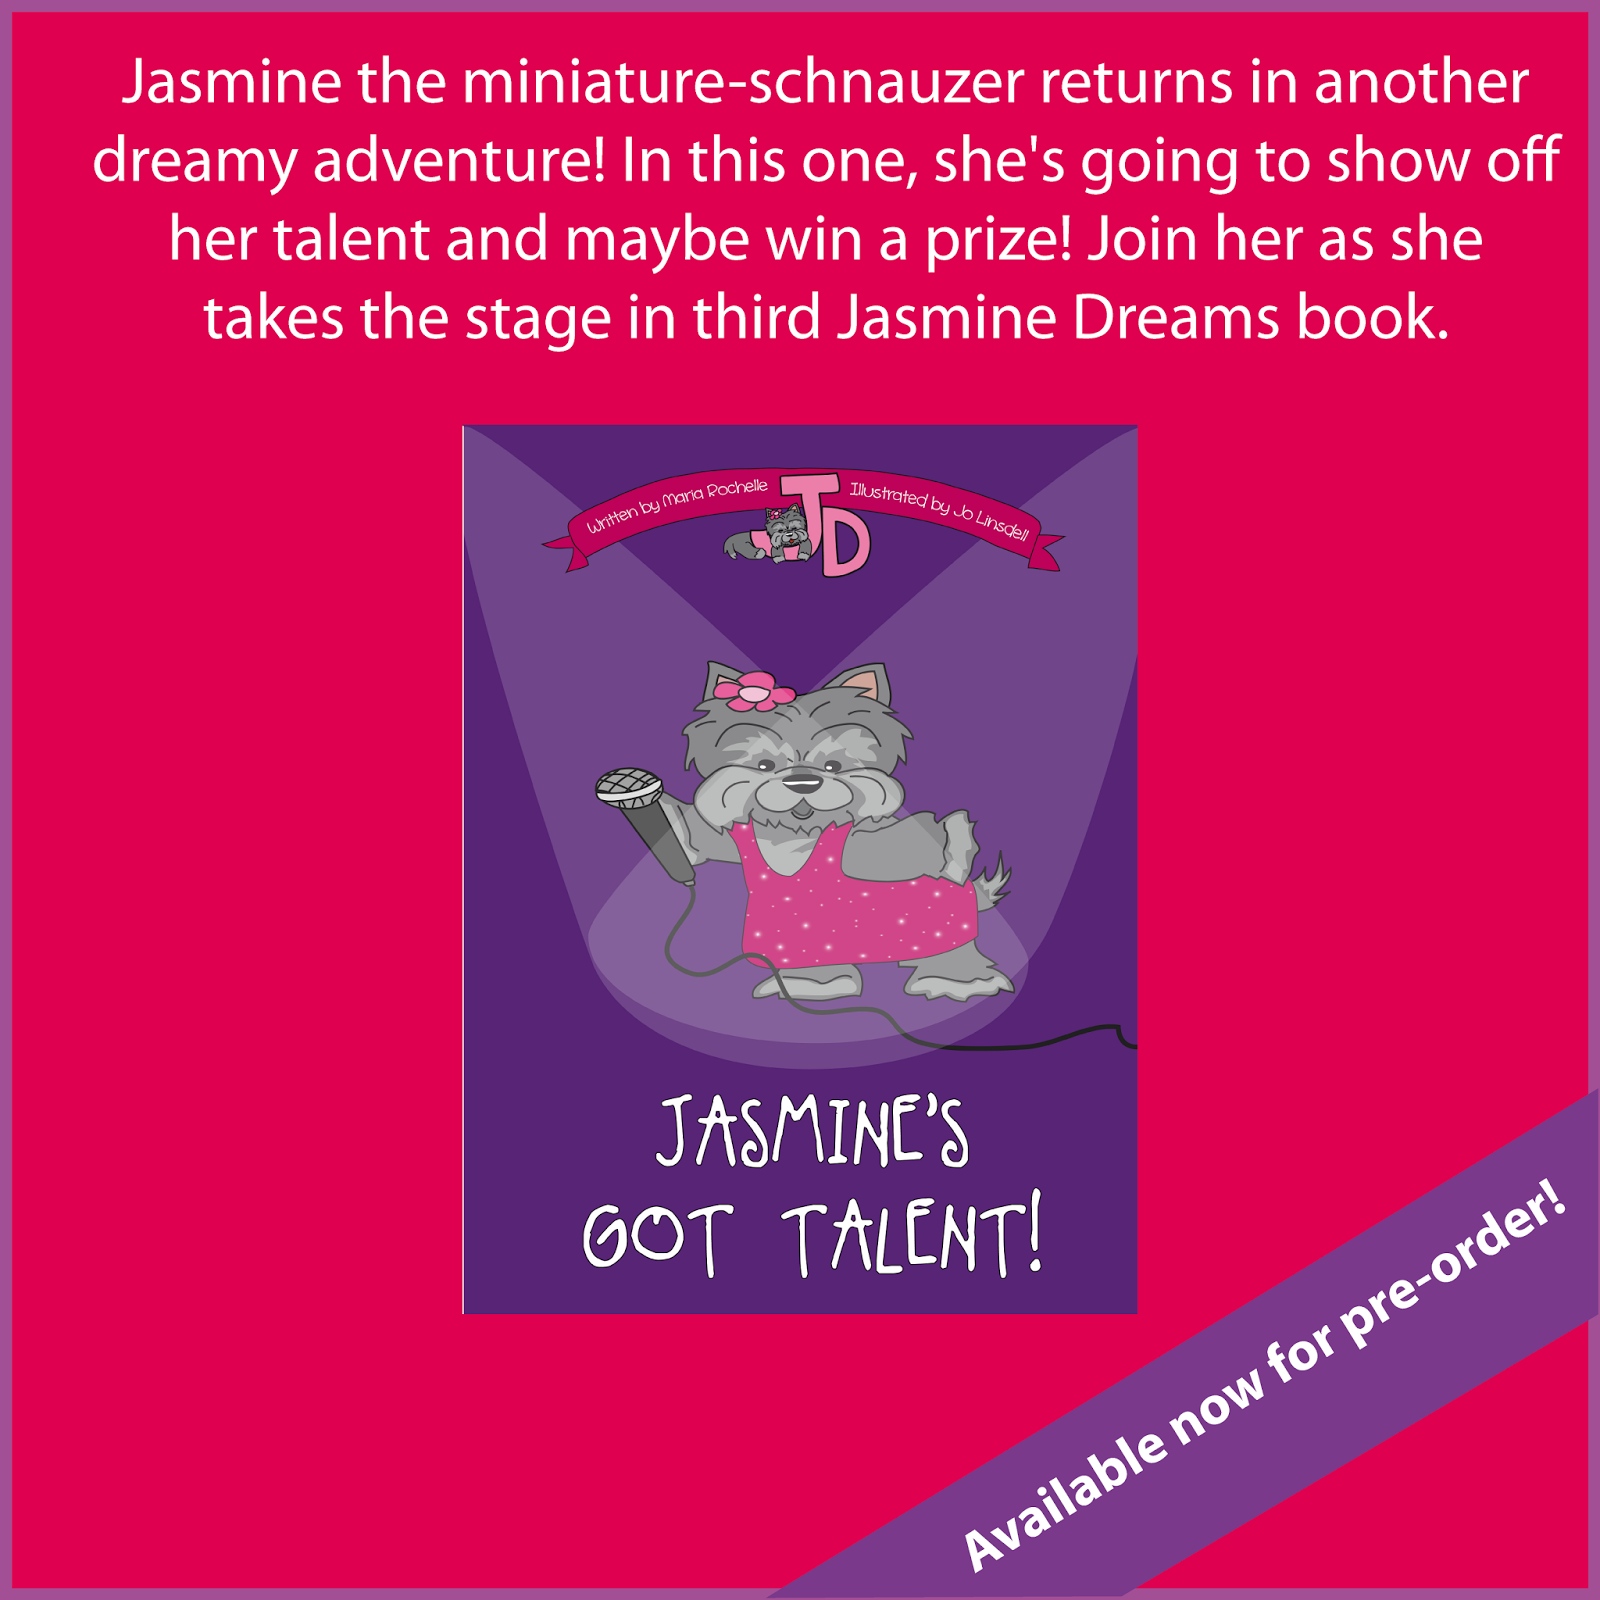 Jasmine's Got Talent! written by Maria Rochelle, illustrated by Jo Linsdell. Available now for pre-order